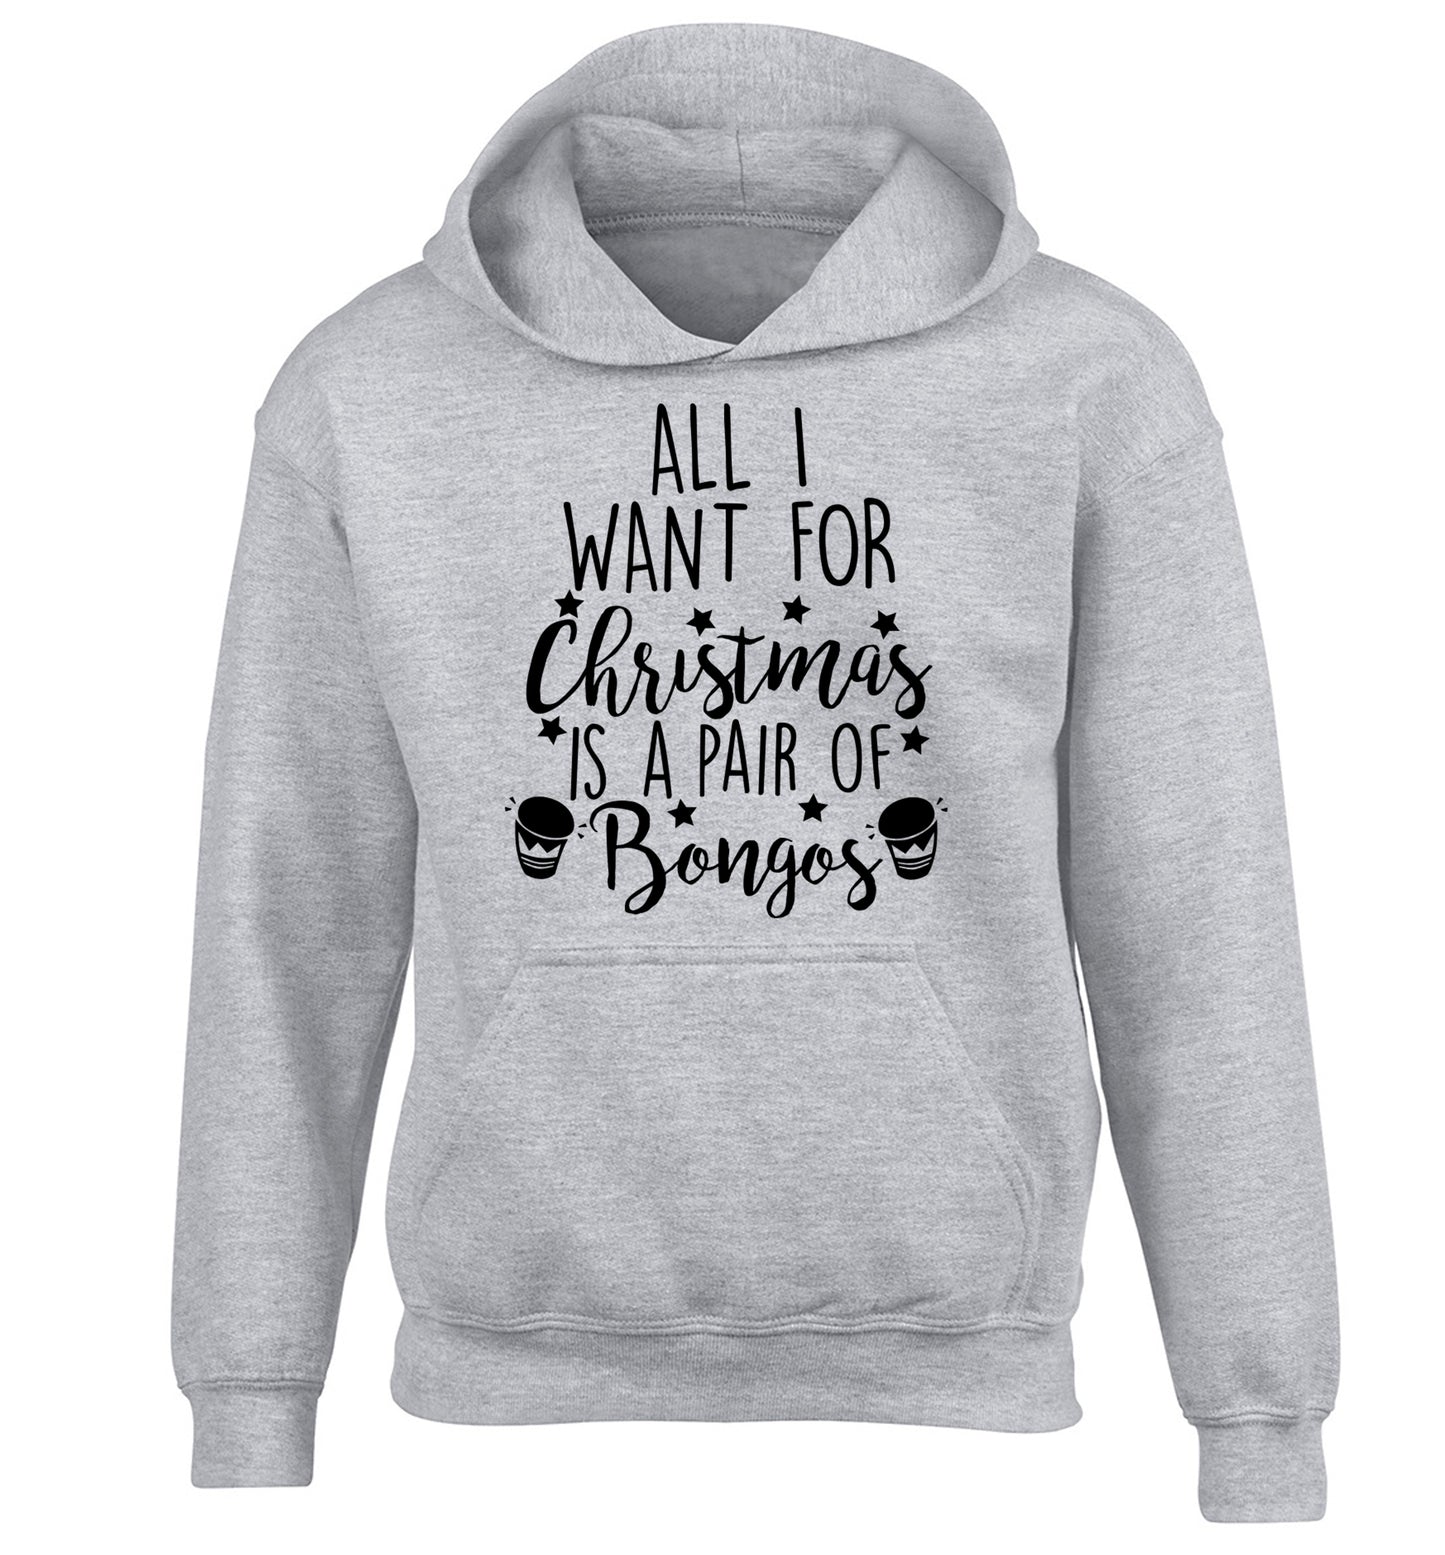 All I want for Christmas is a pair of bongos! children's grey hoodie 12-14 Years